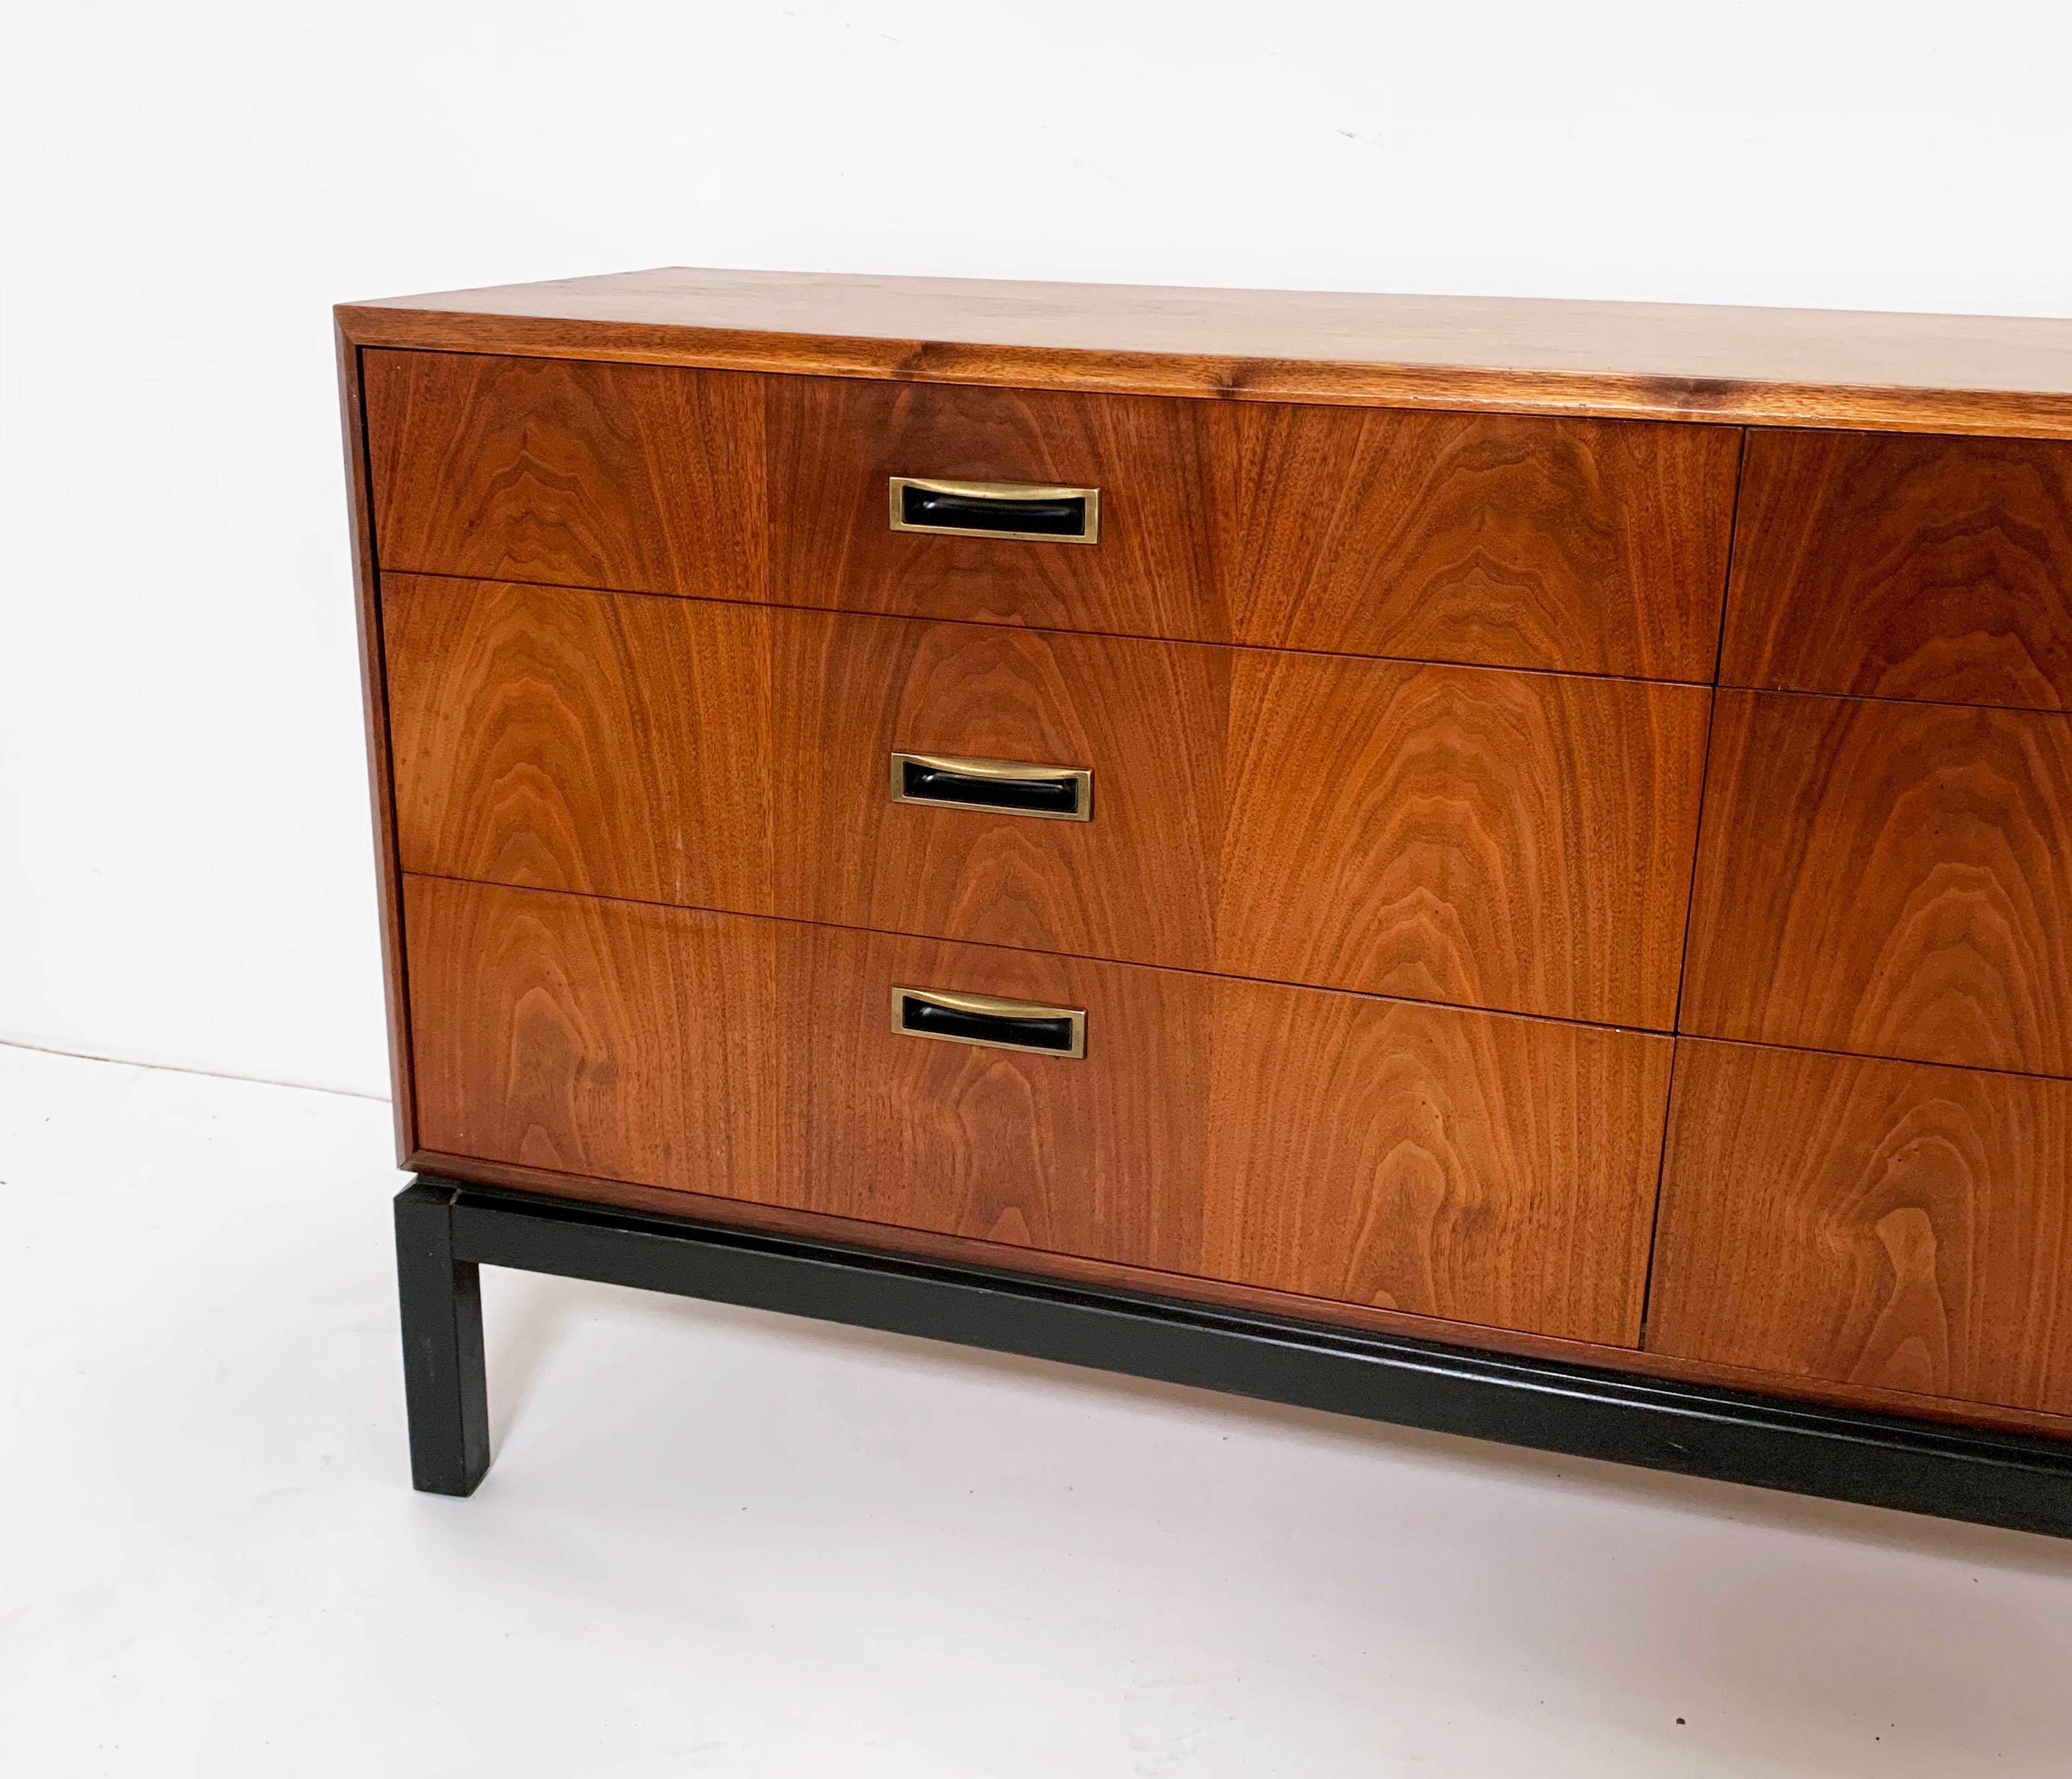 A six-drawer dressing chest in the 